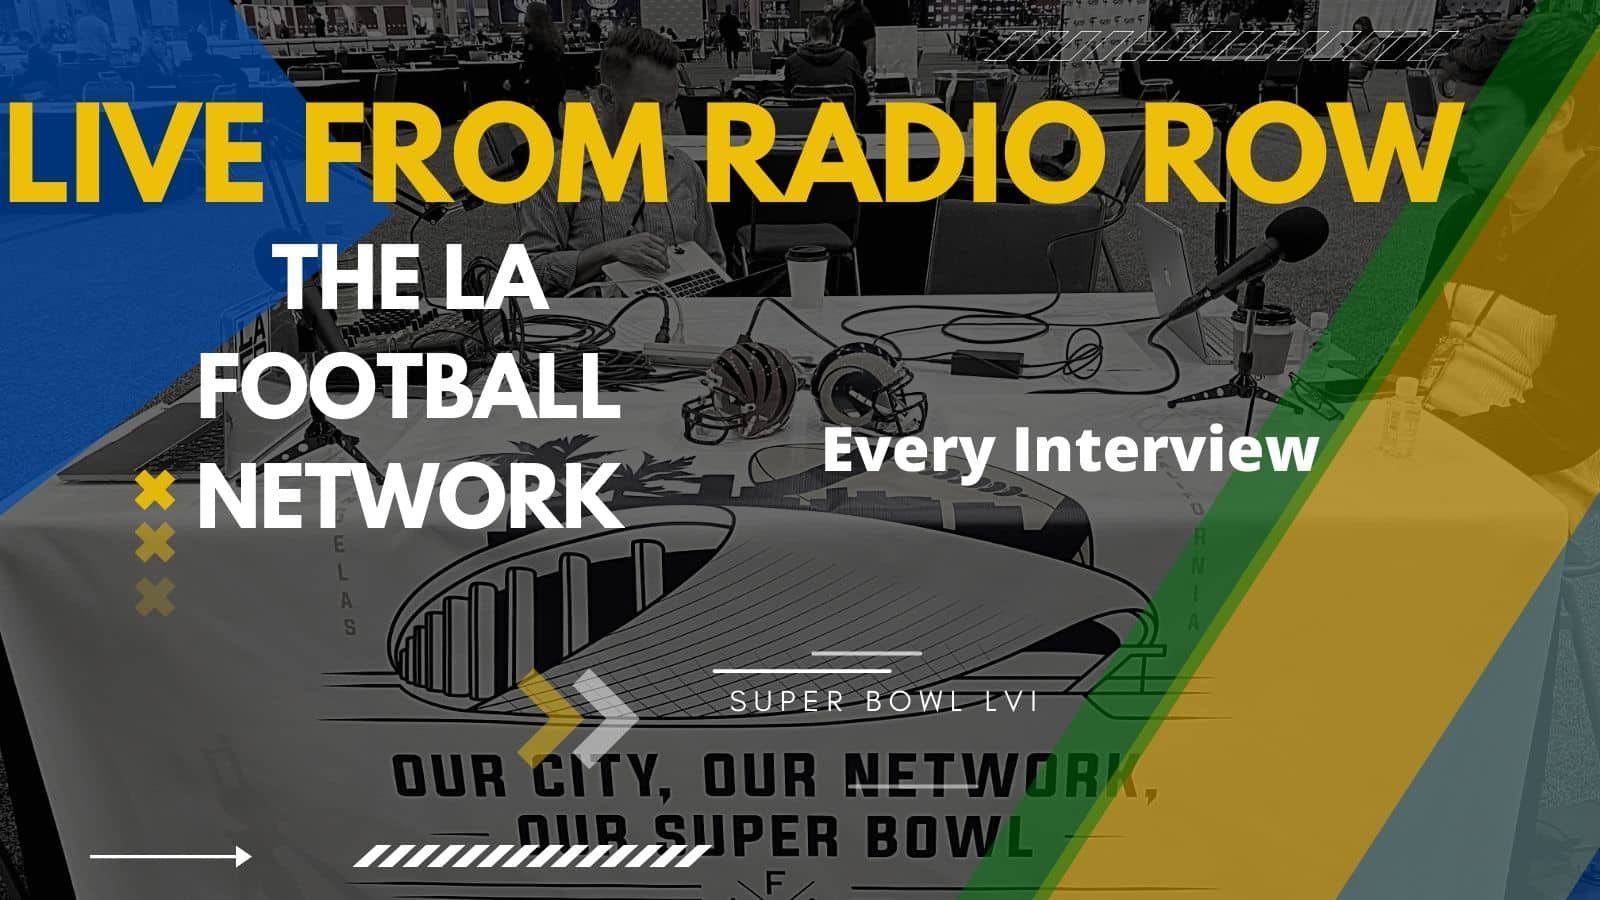 Every LA Football Network Interview From Radio Row Los Angeles 2022